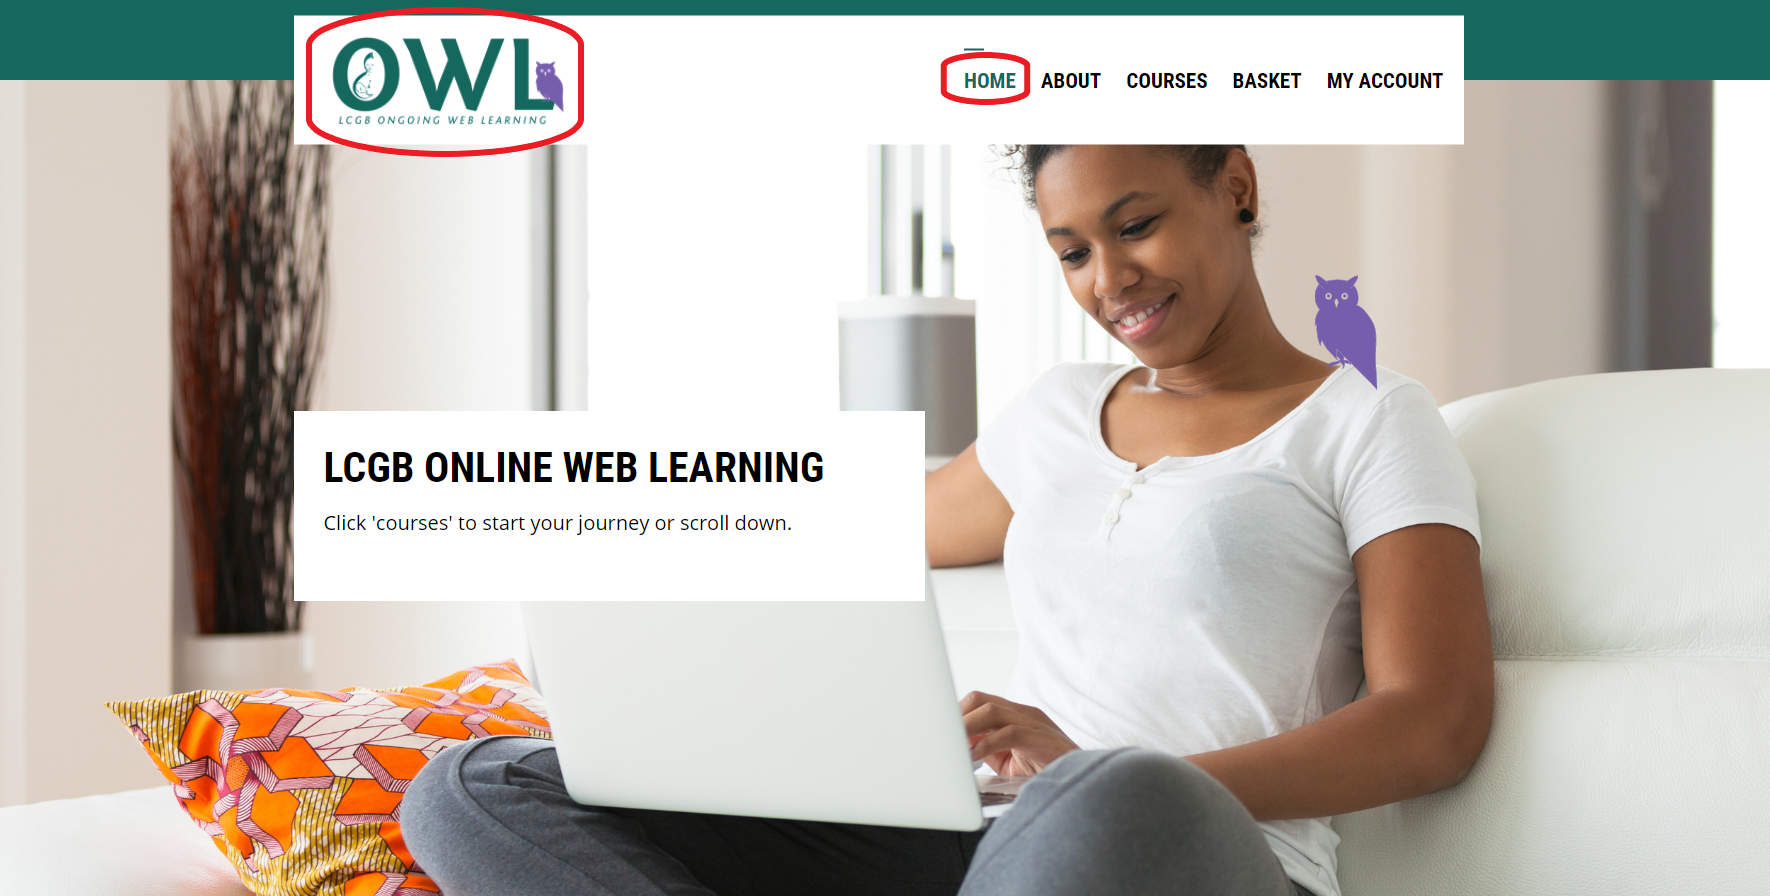 Home Page with OWL logo circled at top left